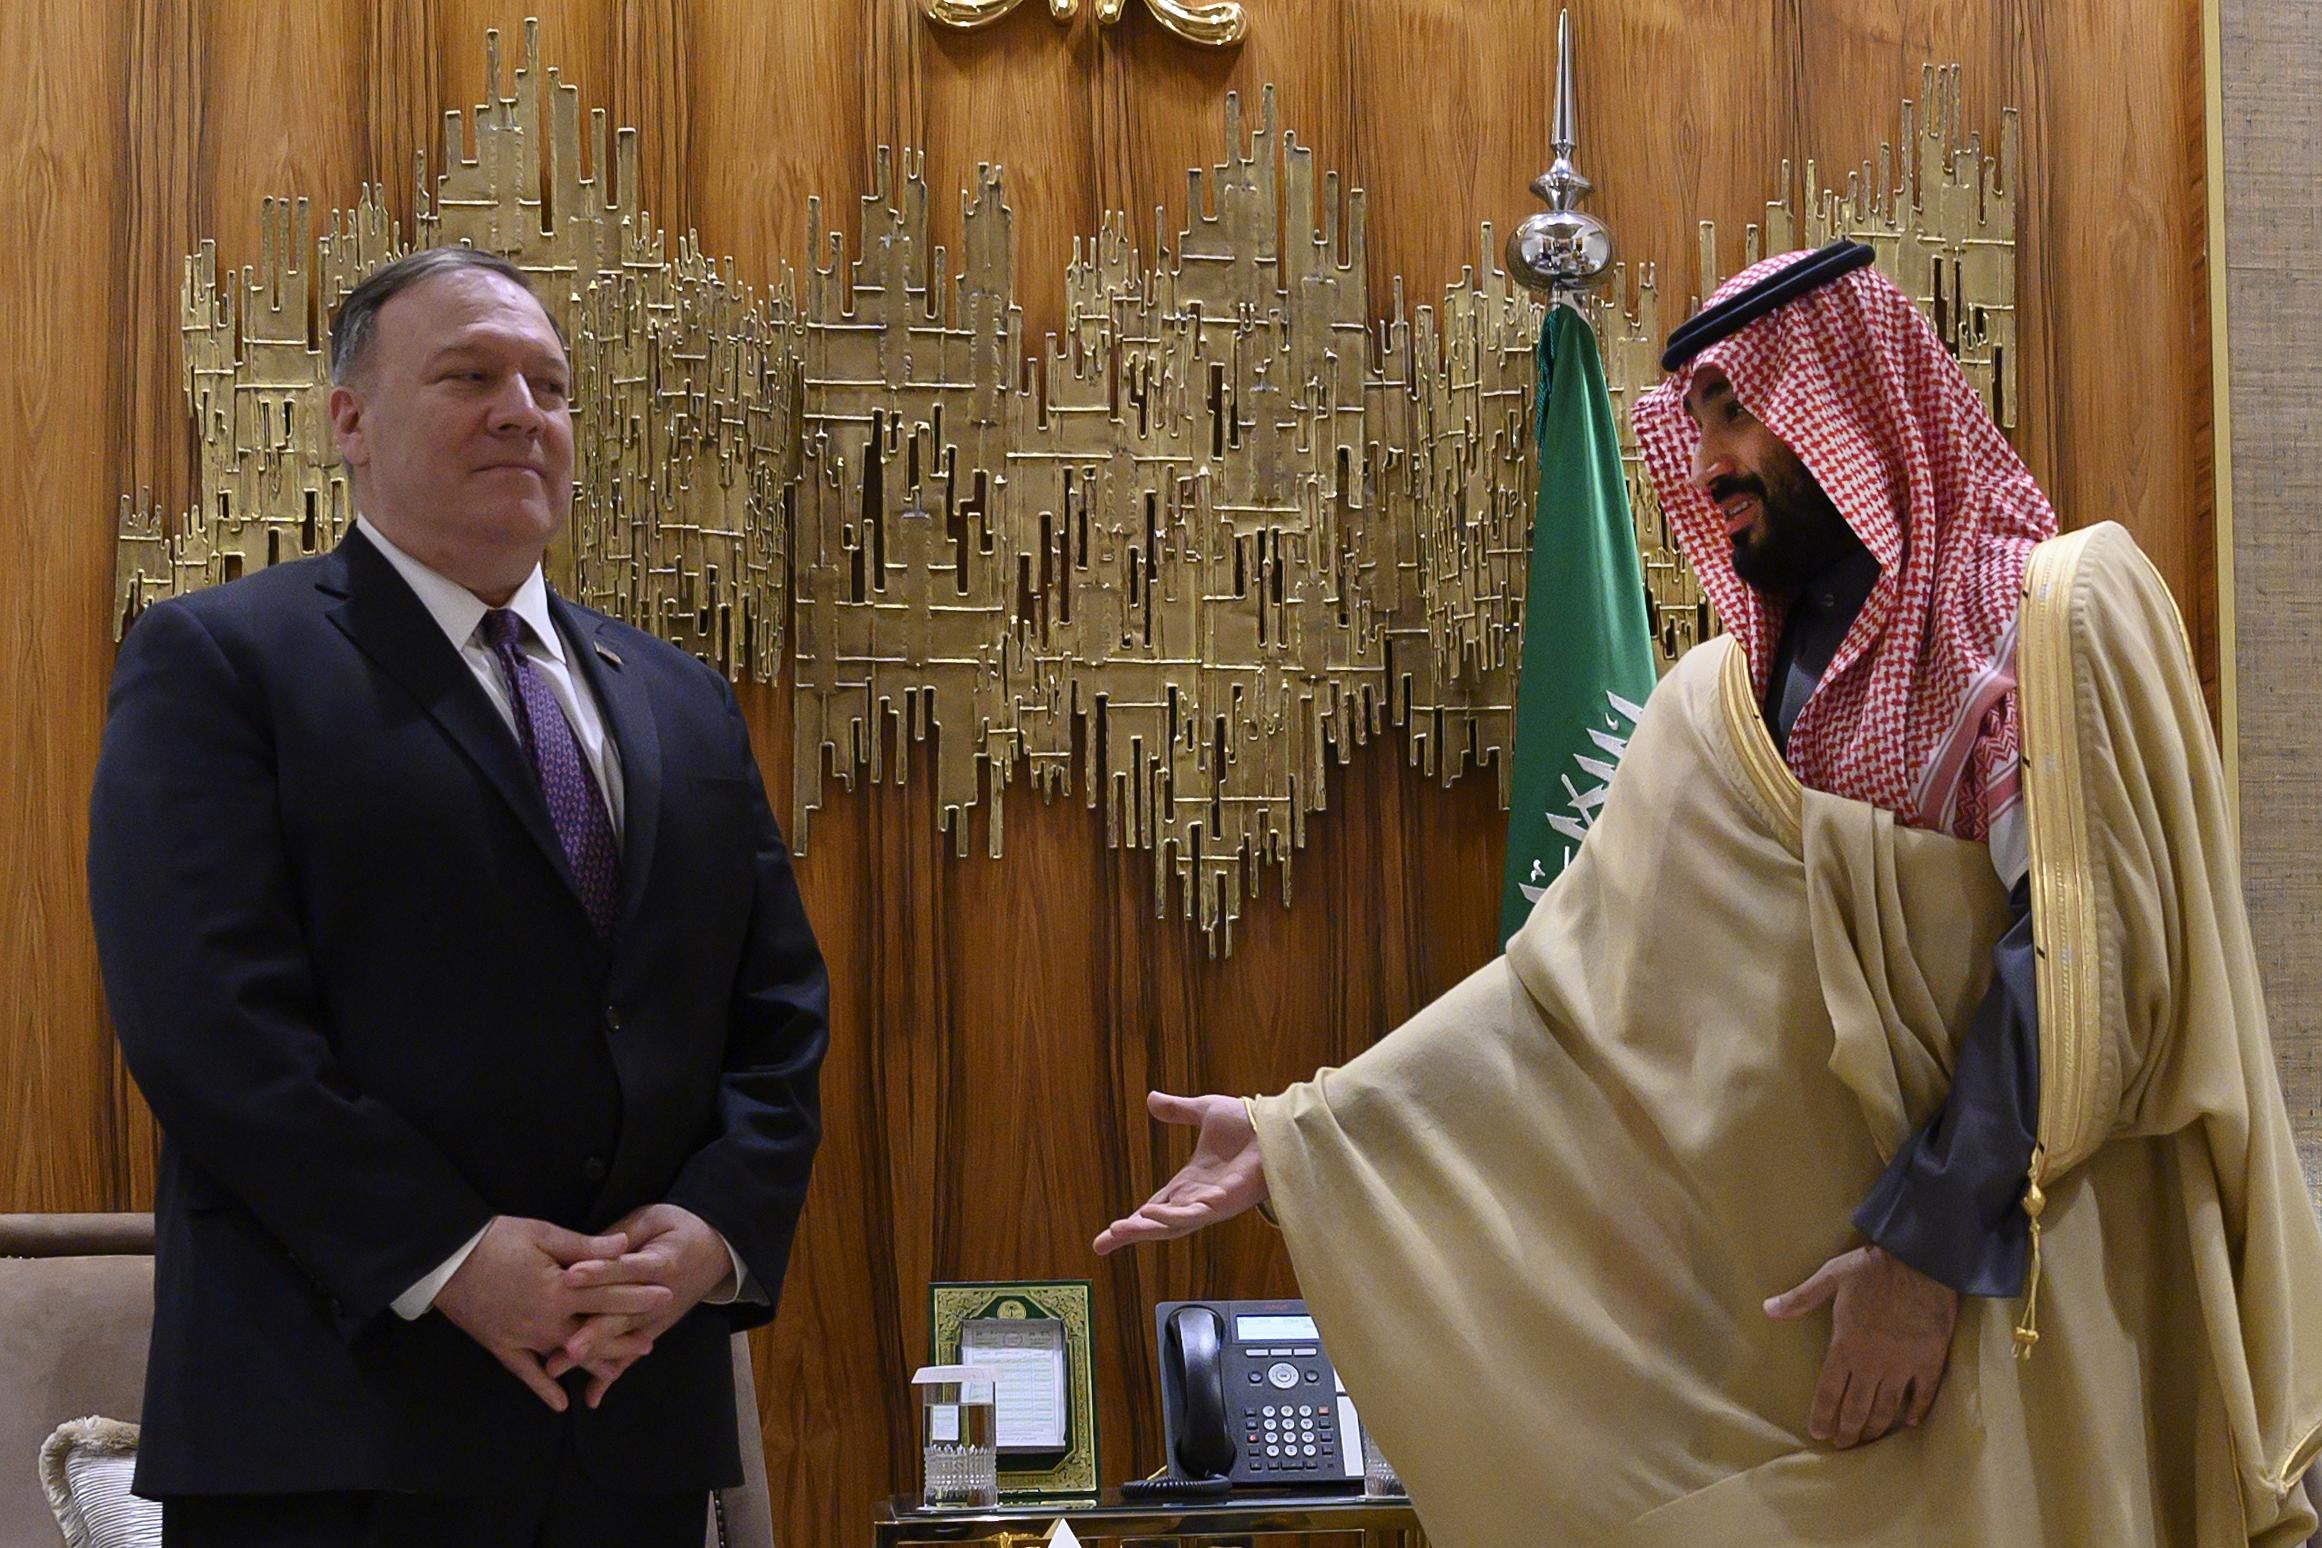 The Crown Prince gestures to Pompeo to sit during a meeting in Saudi Arabia.